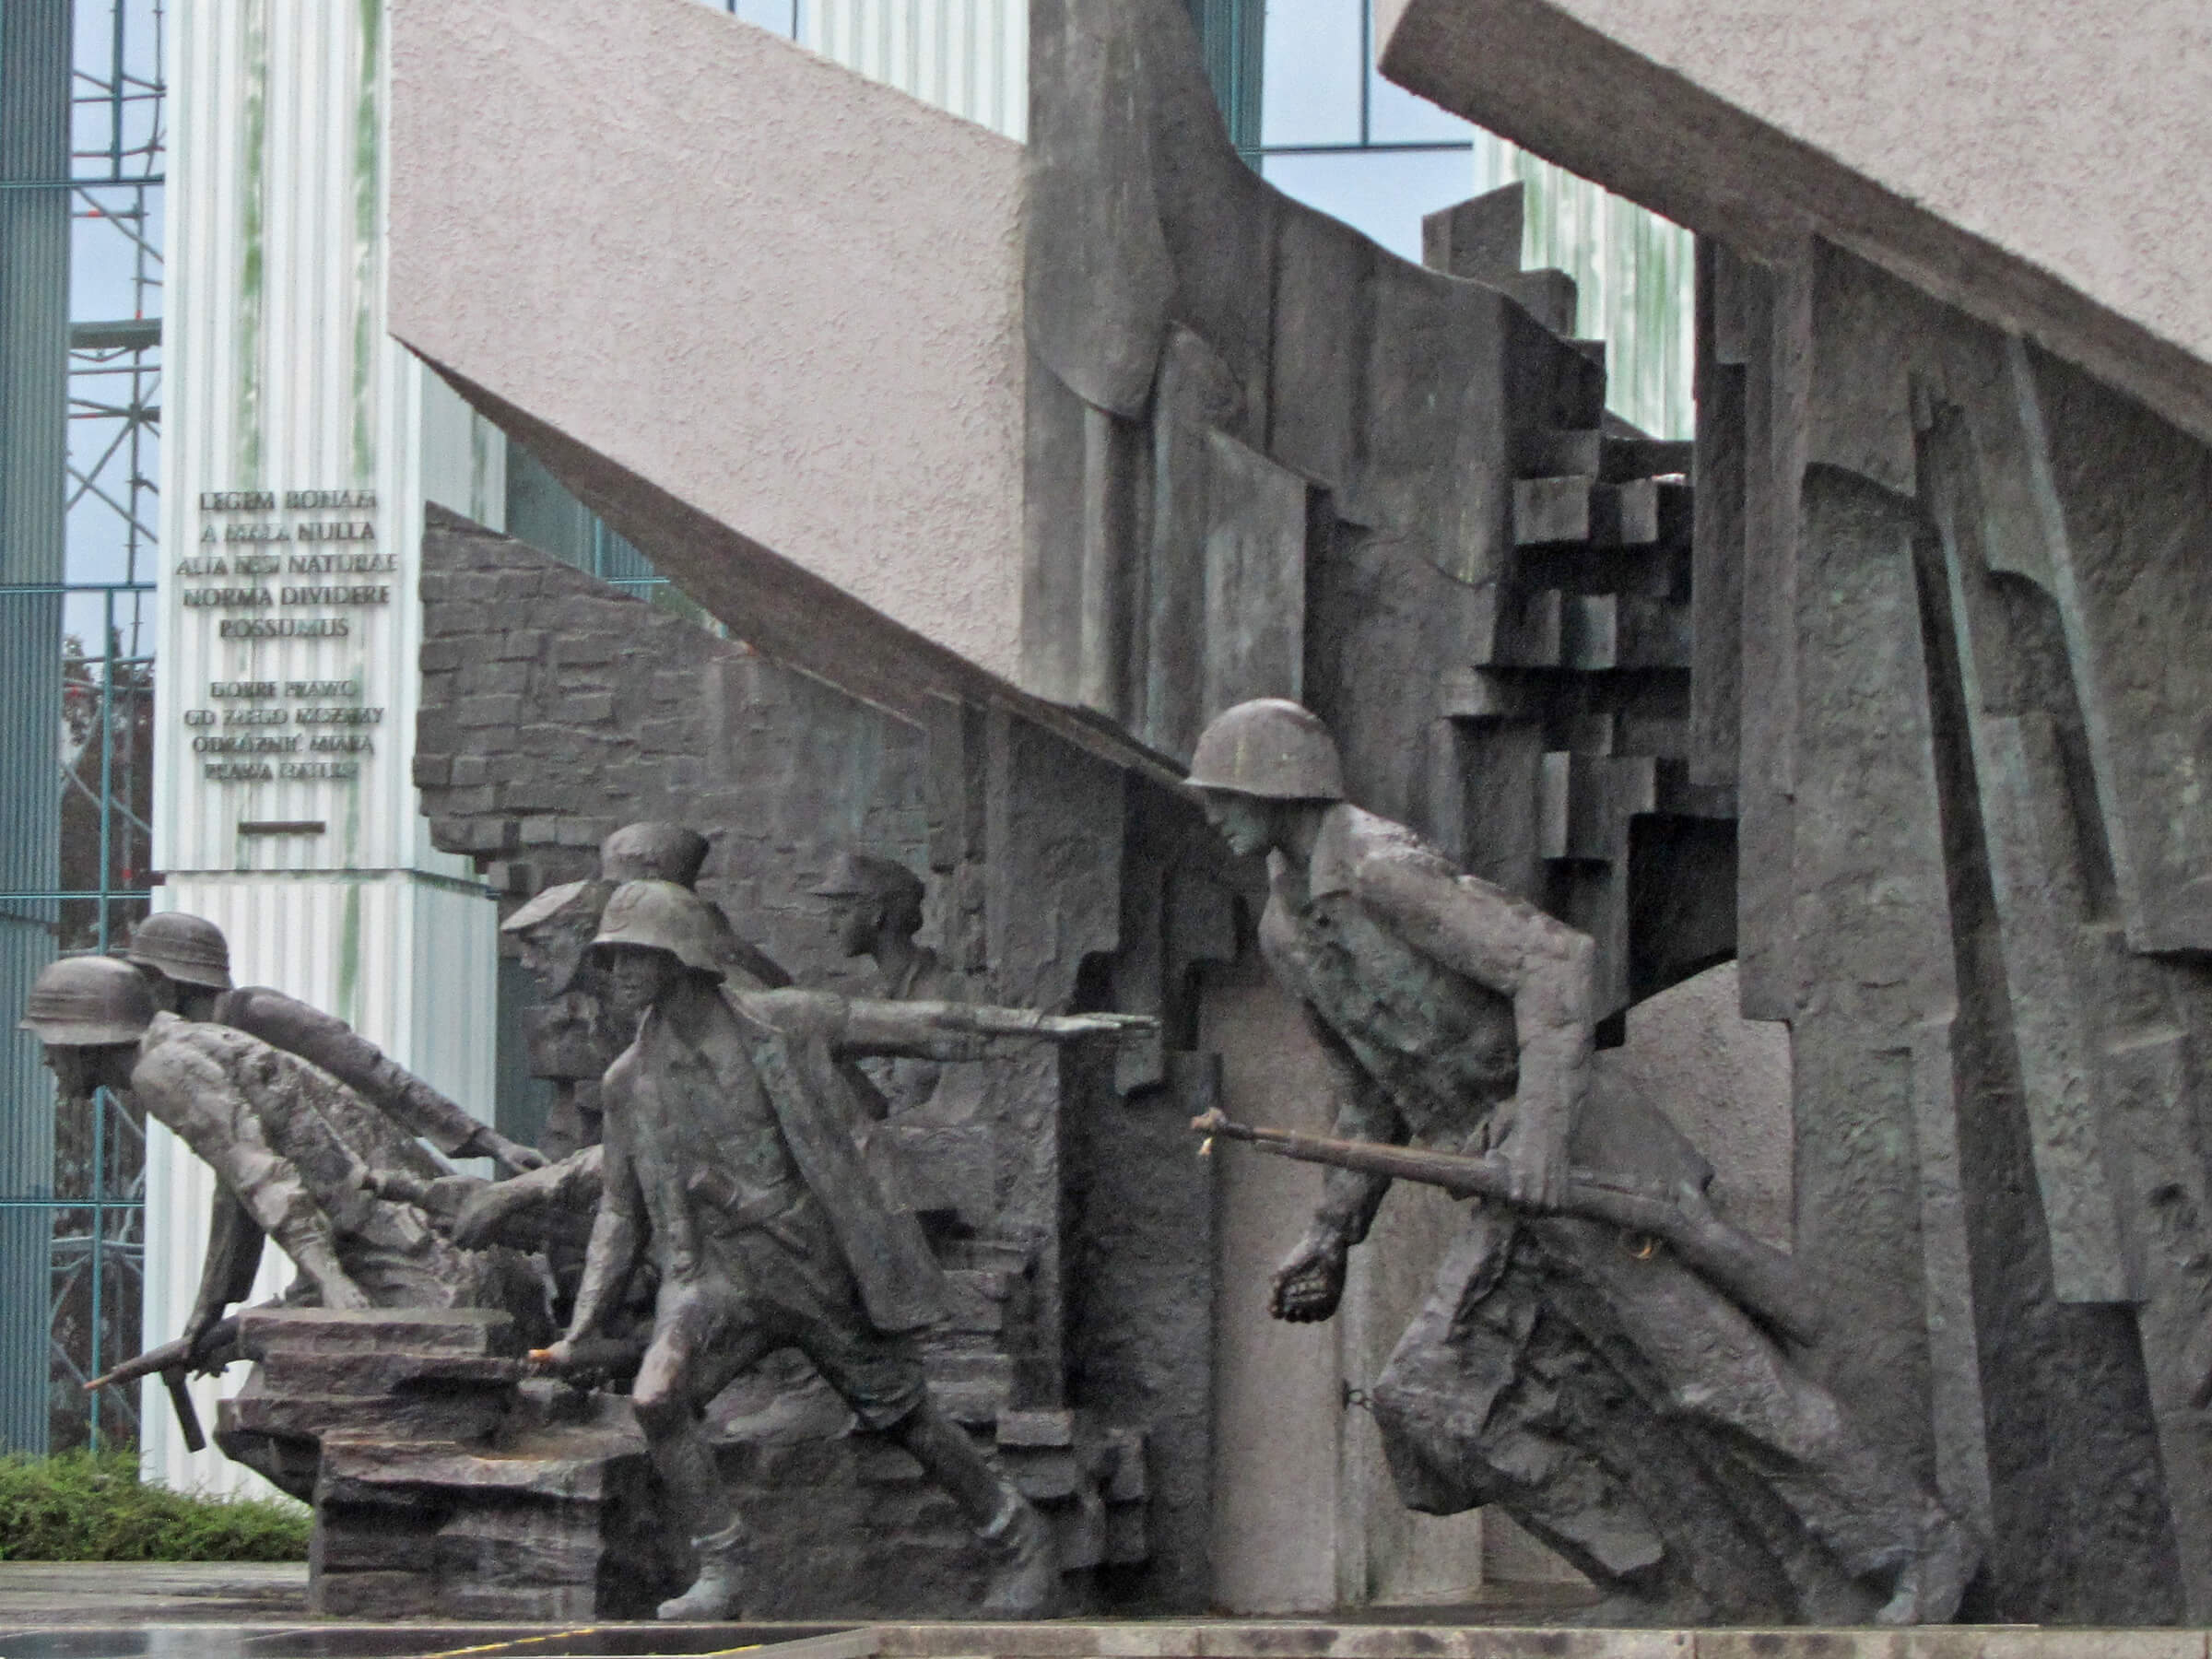 Bach - Memorial to the heroes of the Warsaw Uprising of 1944 showing resistance fighters defending a barricade. Terence Faircloth - Flickr